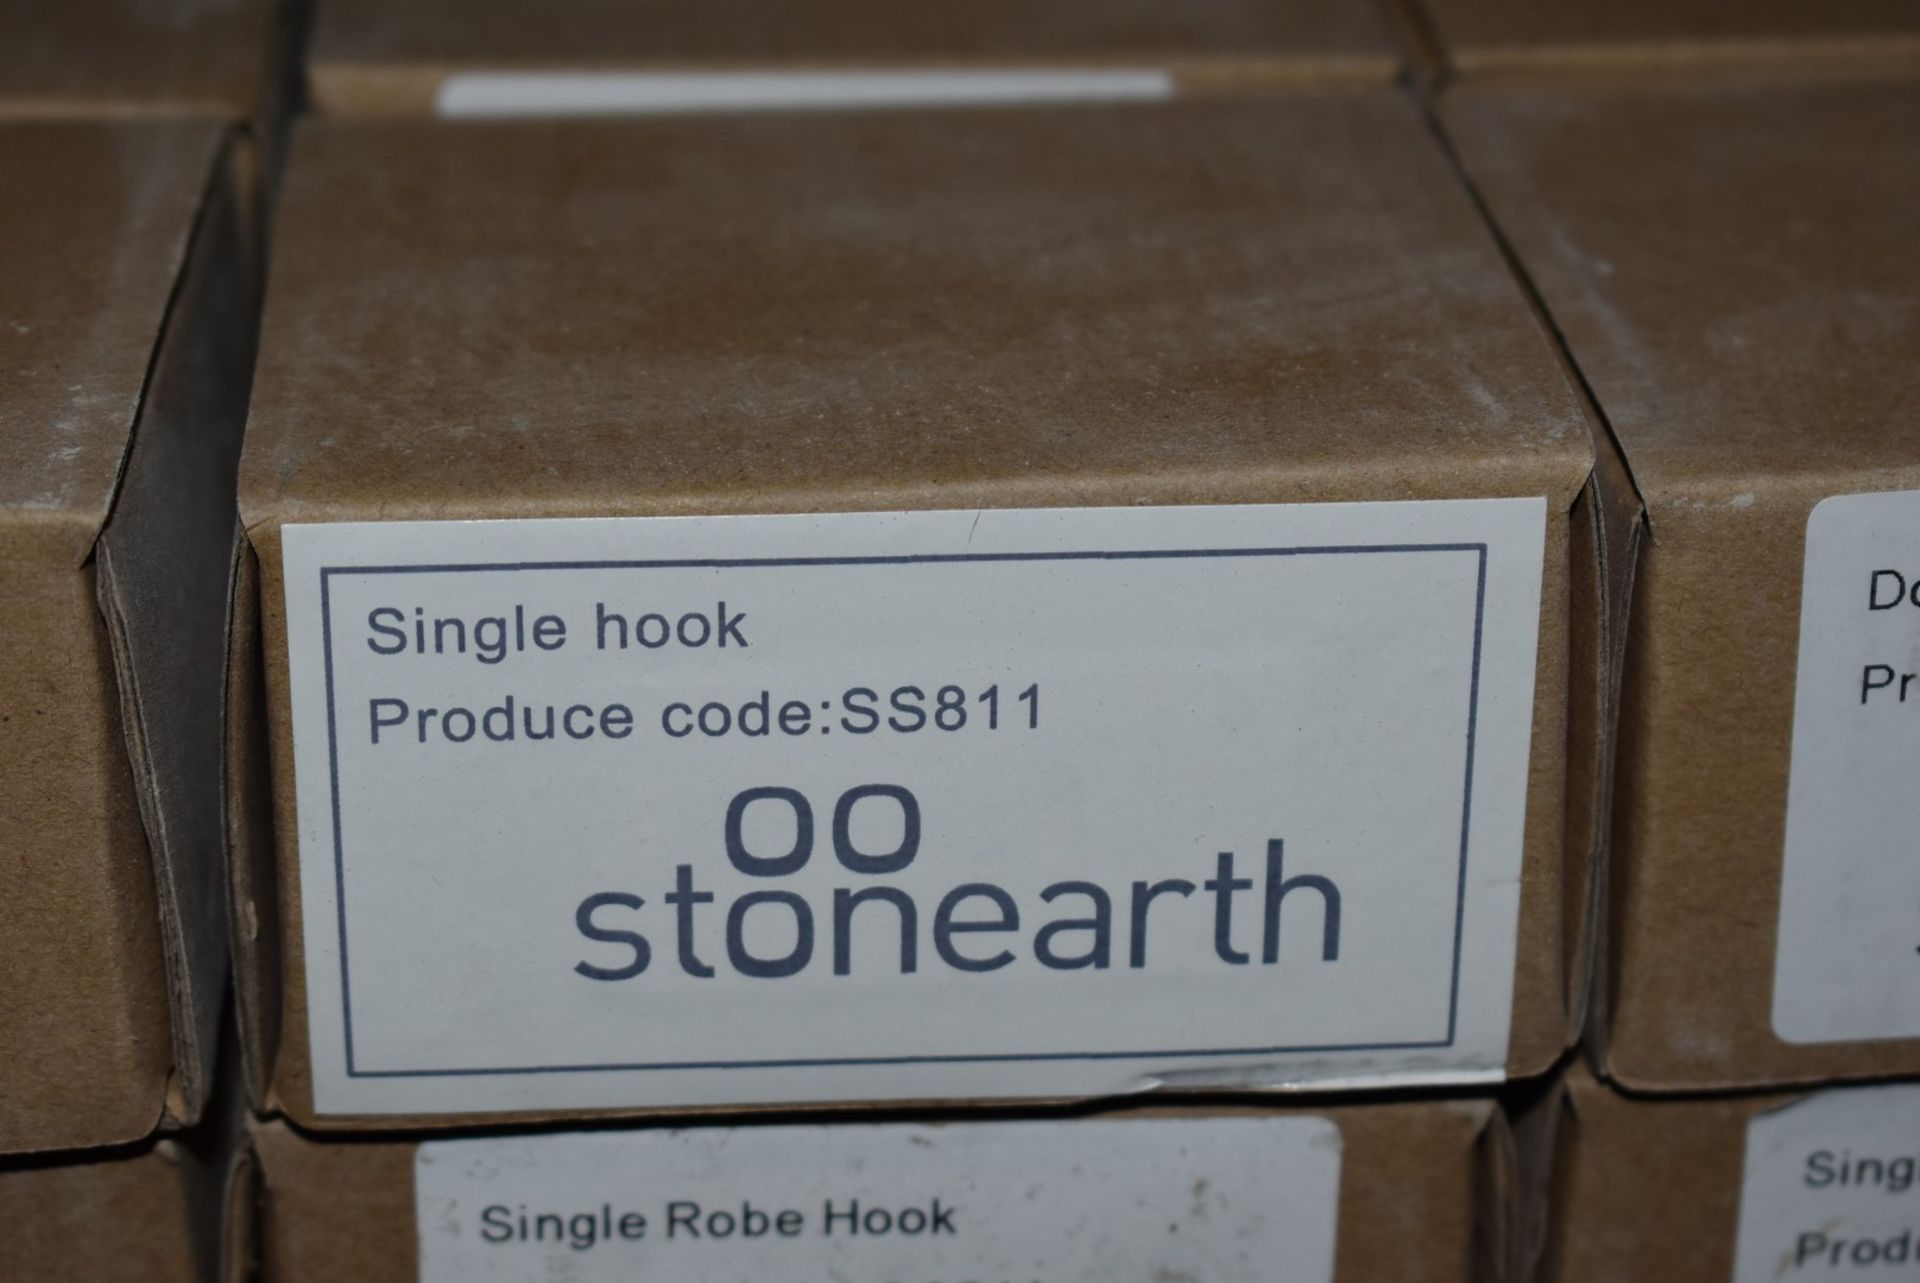 1 x Stonearth Single Robe Hook - Solid Stainless Steel Bathroom Accessory - Brand New & Boxed - Image 3 of 3